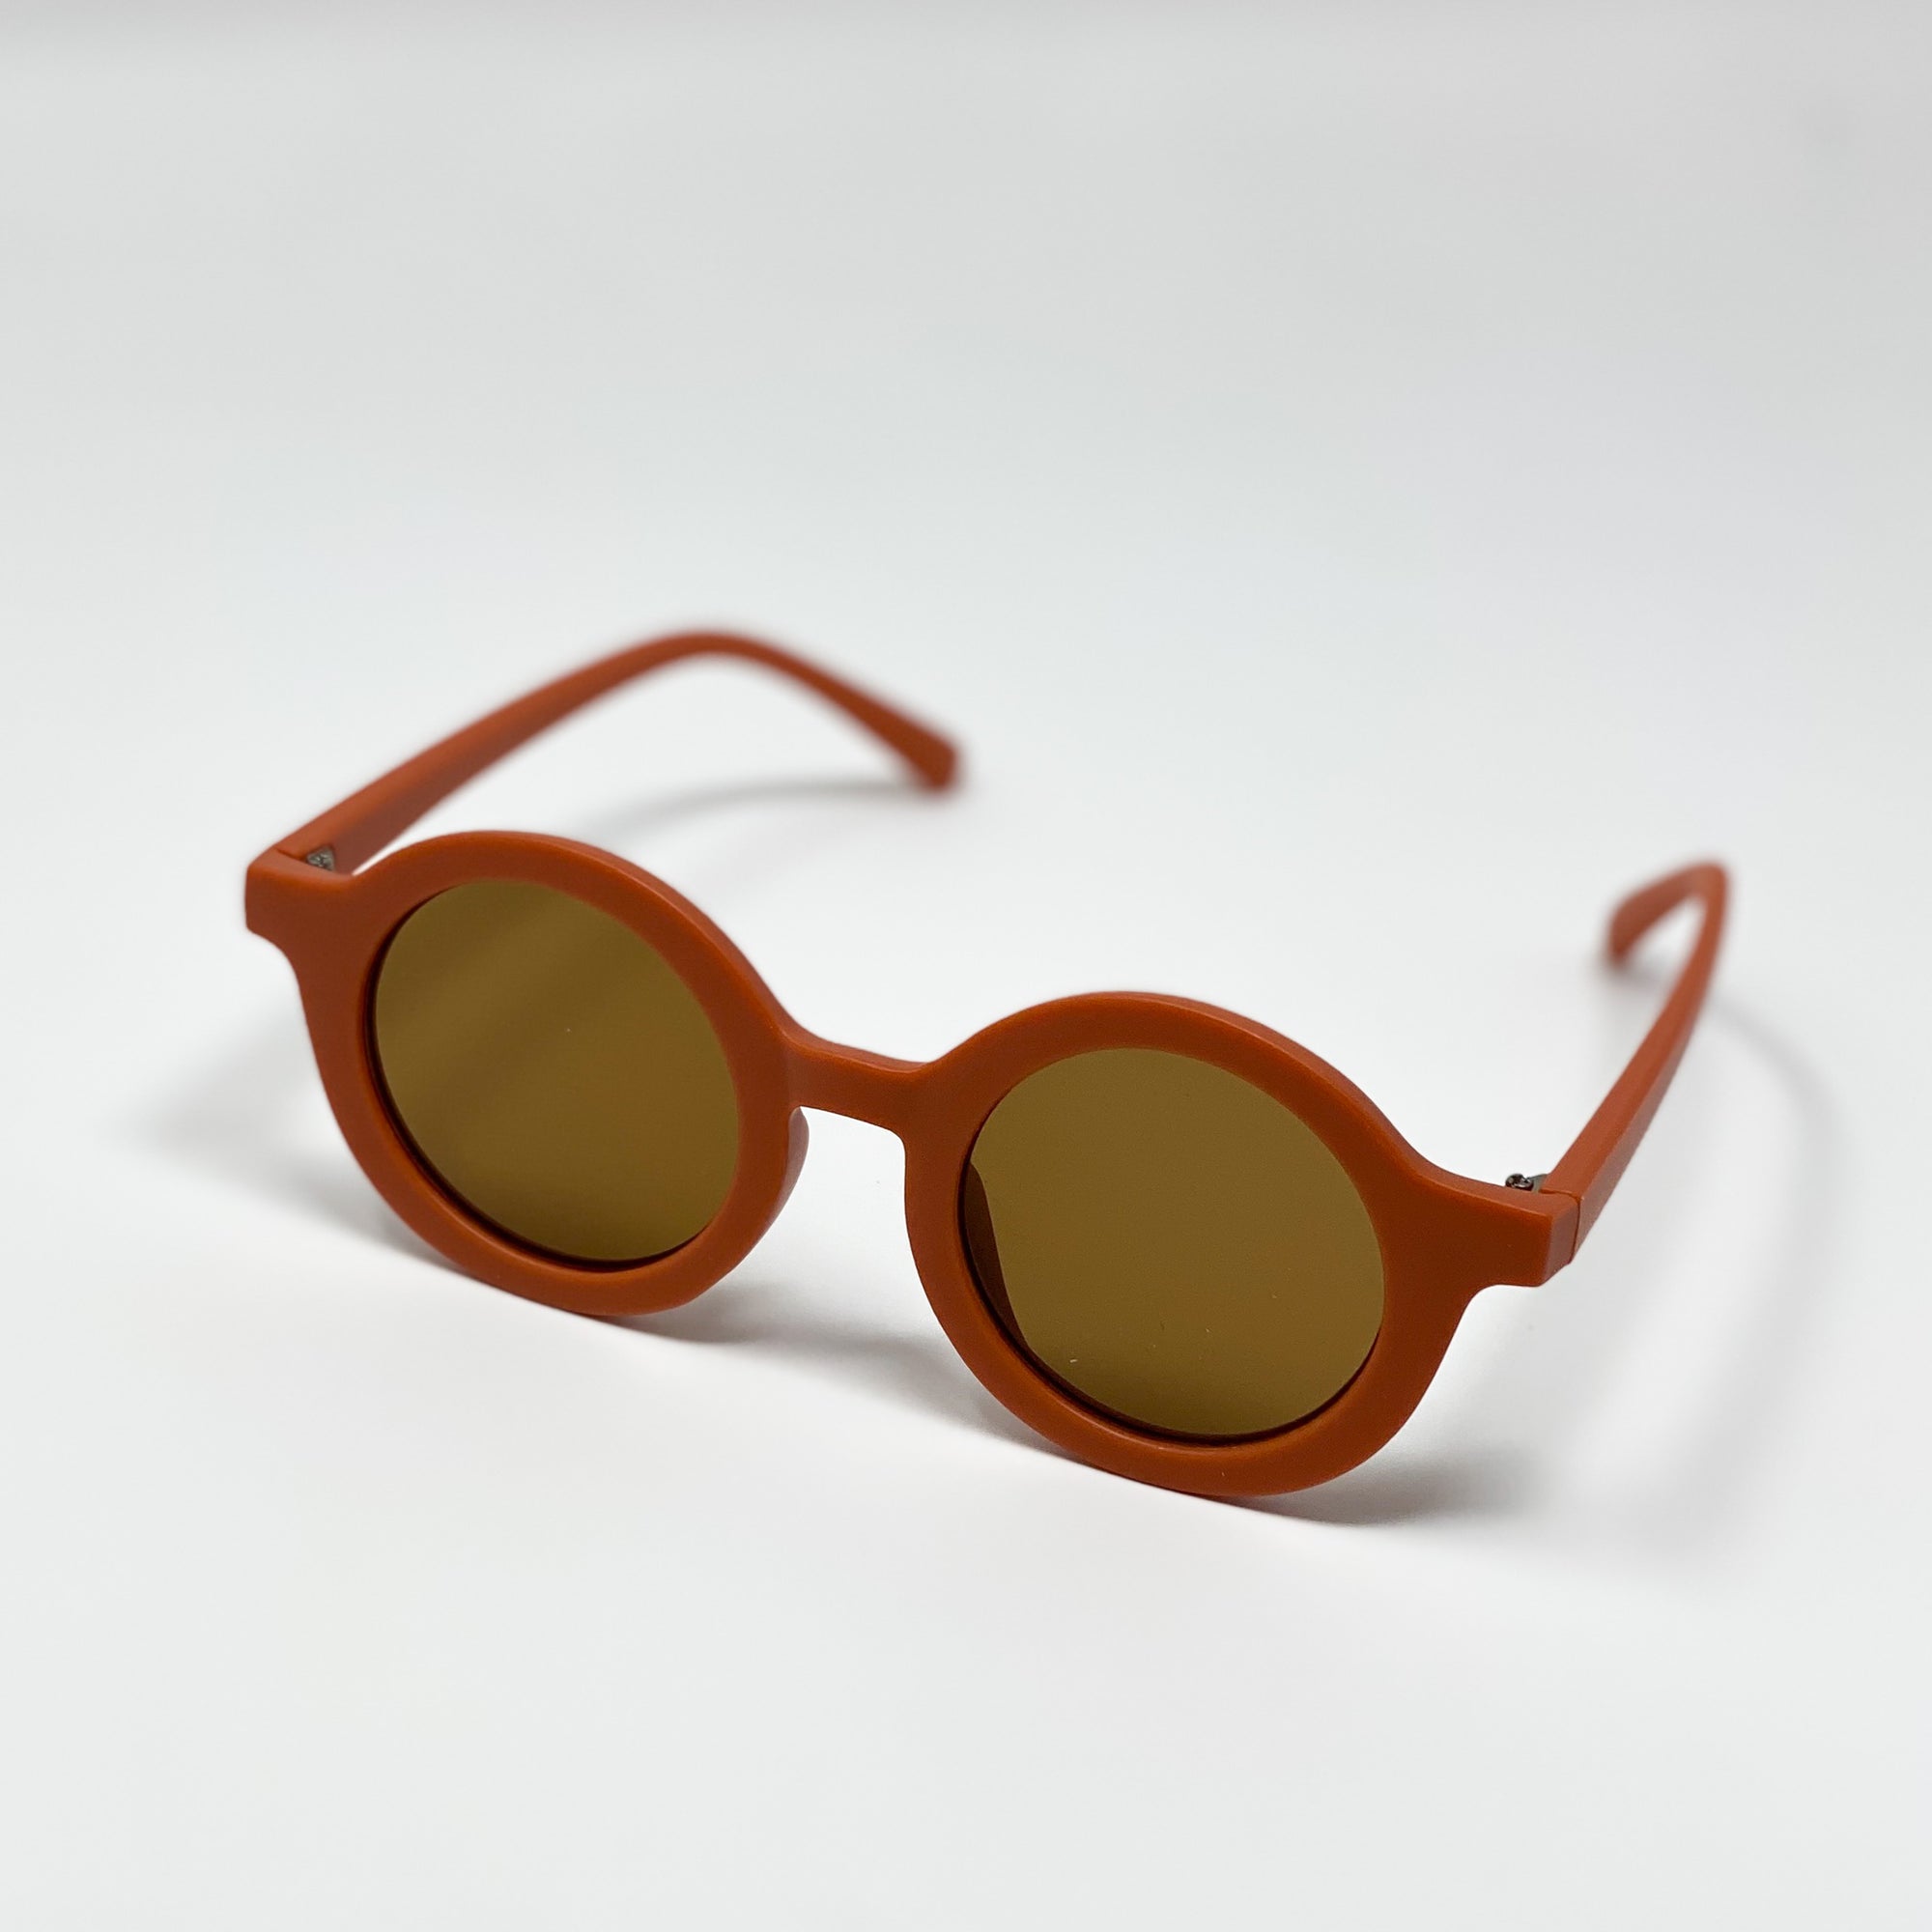 sustainable sunglasses in dusty pink